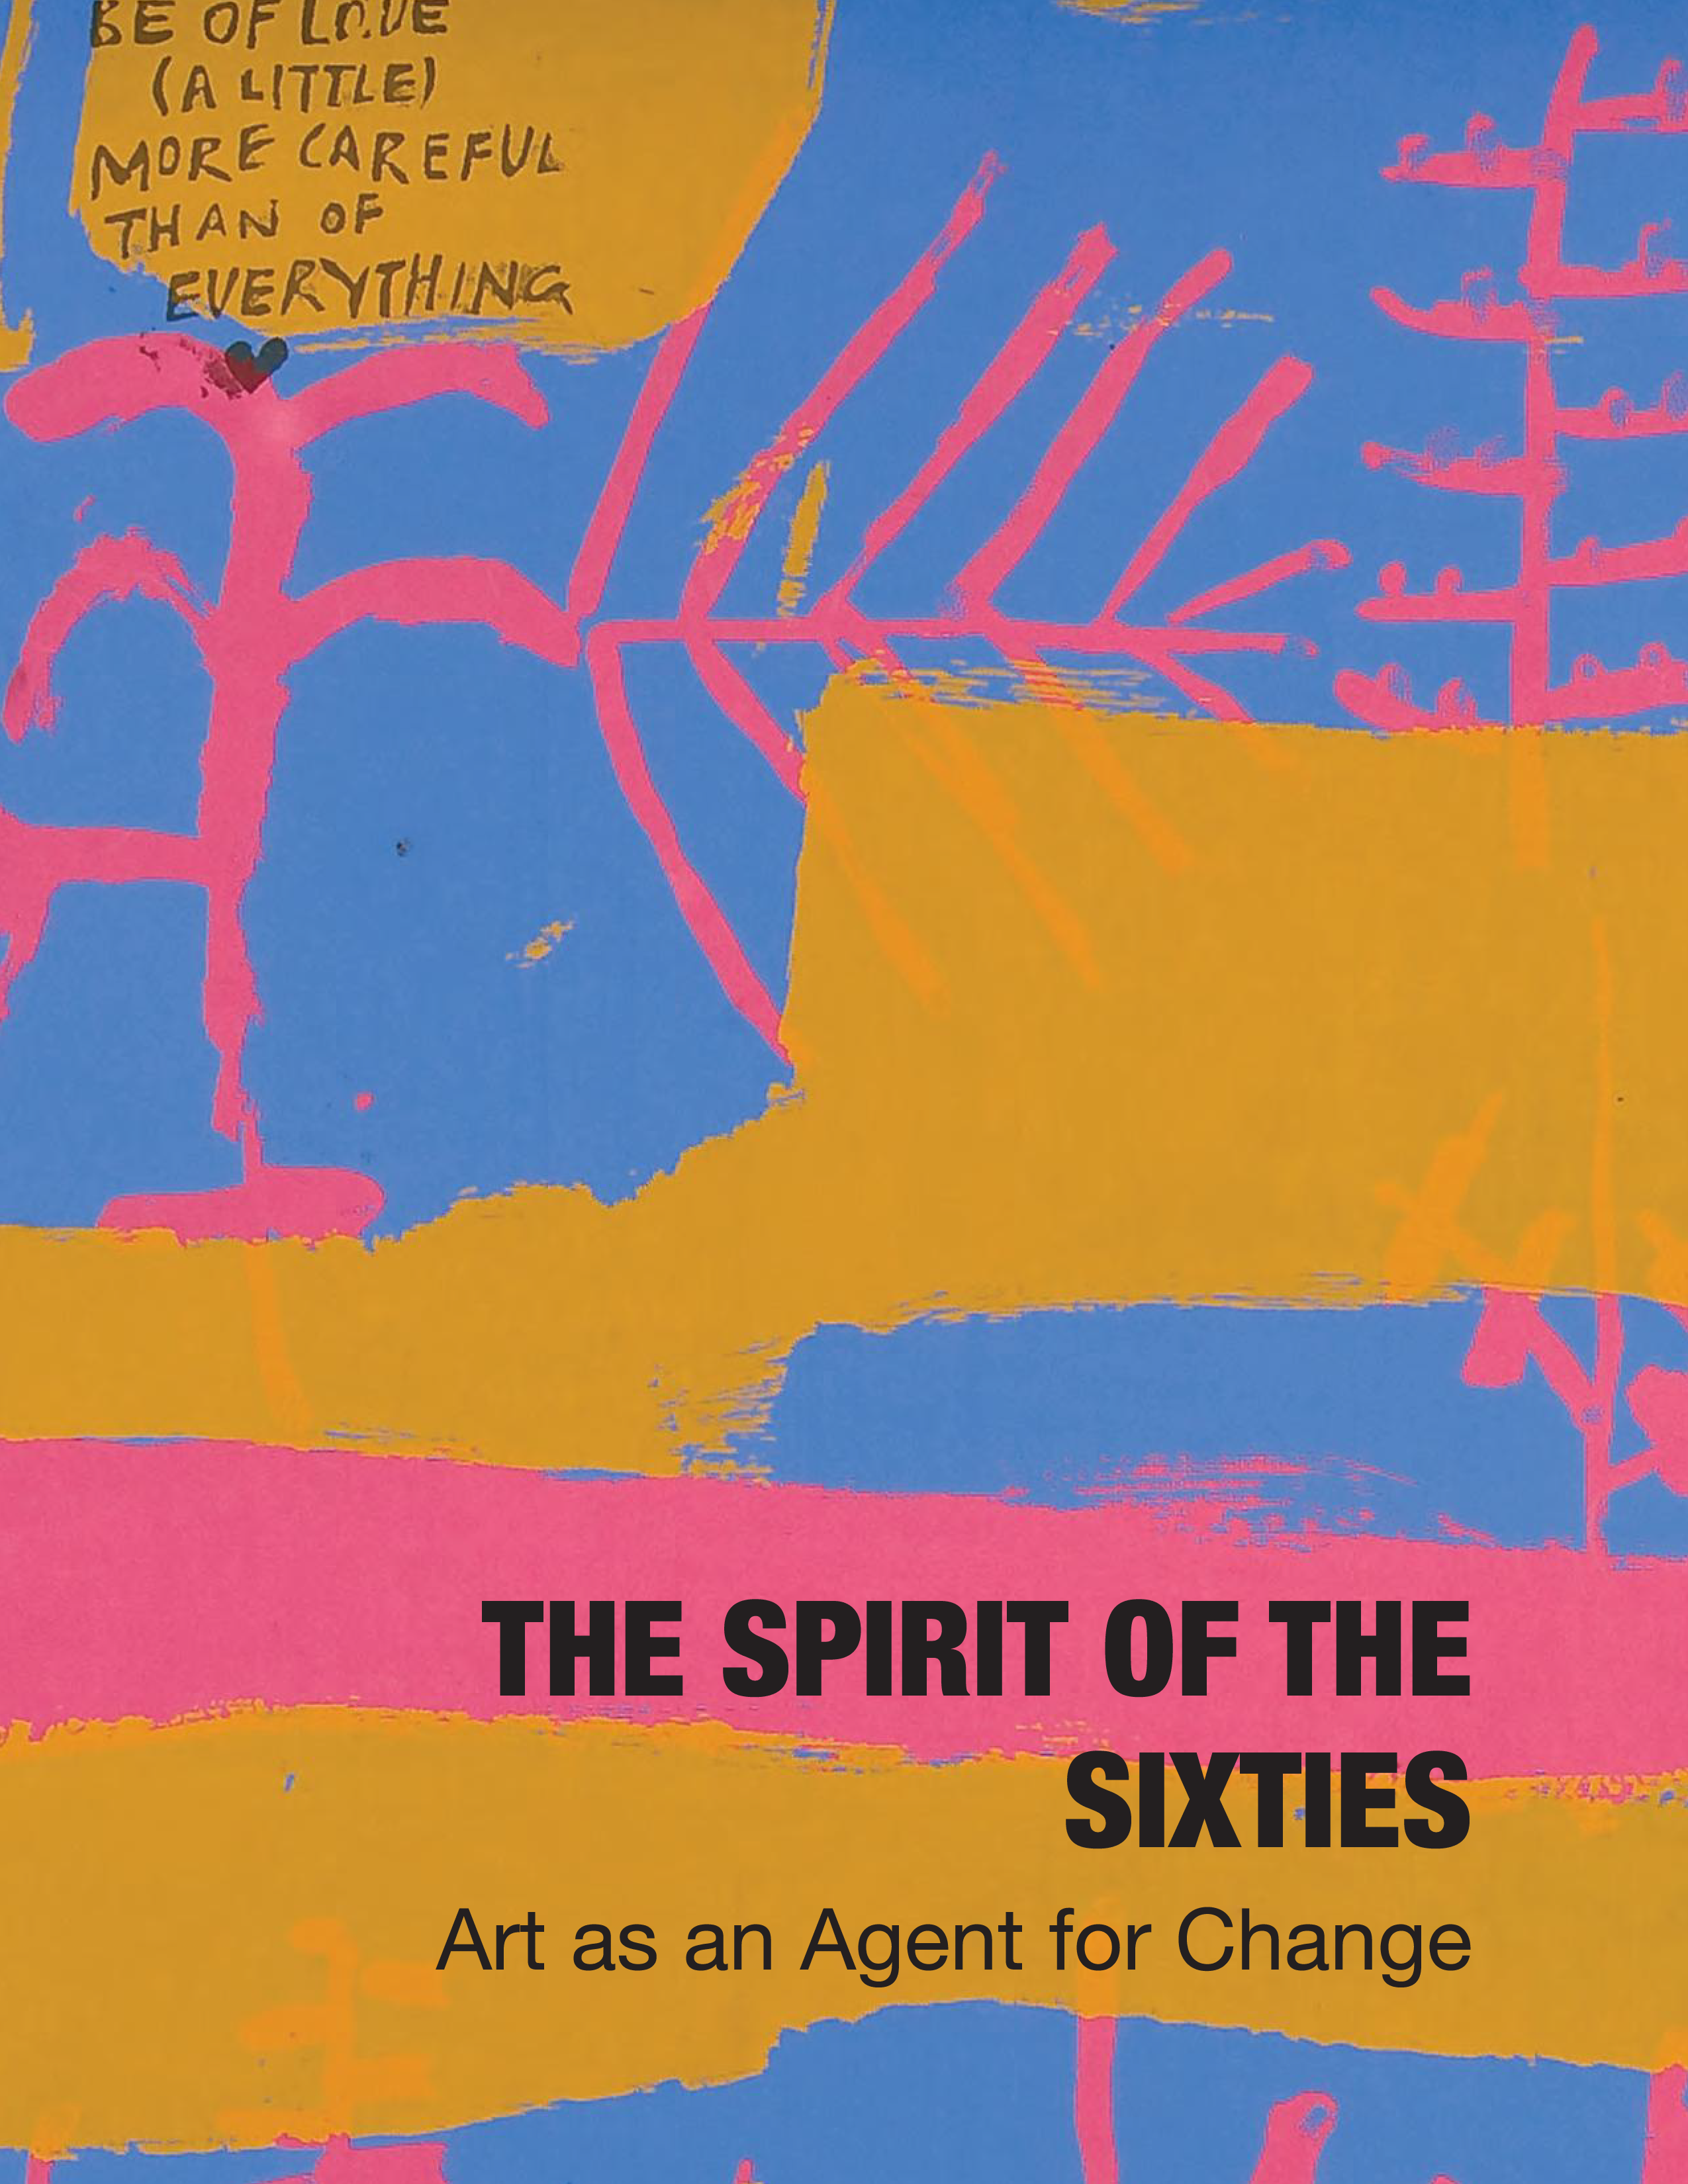 The Spirit of the Sixties: Art as an Agent for Change